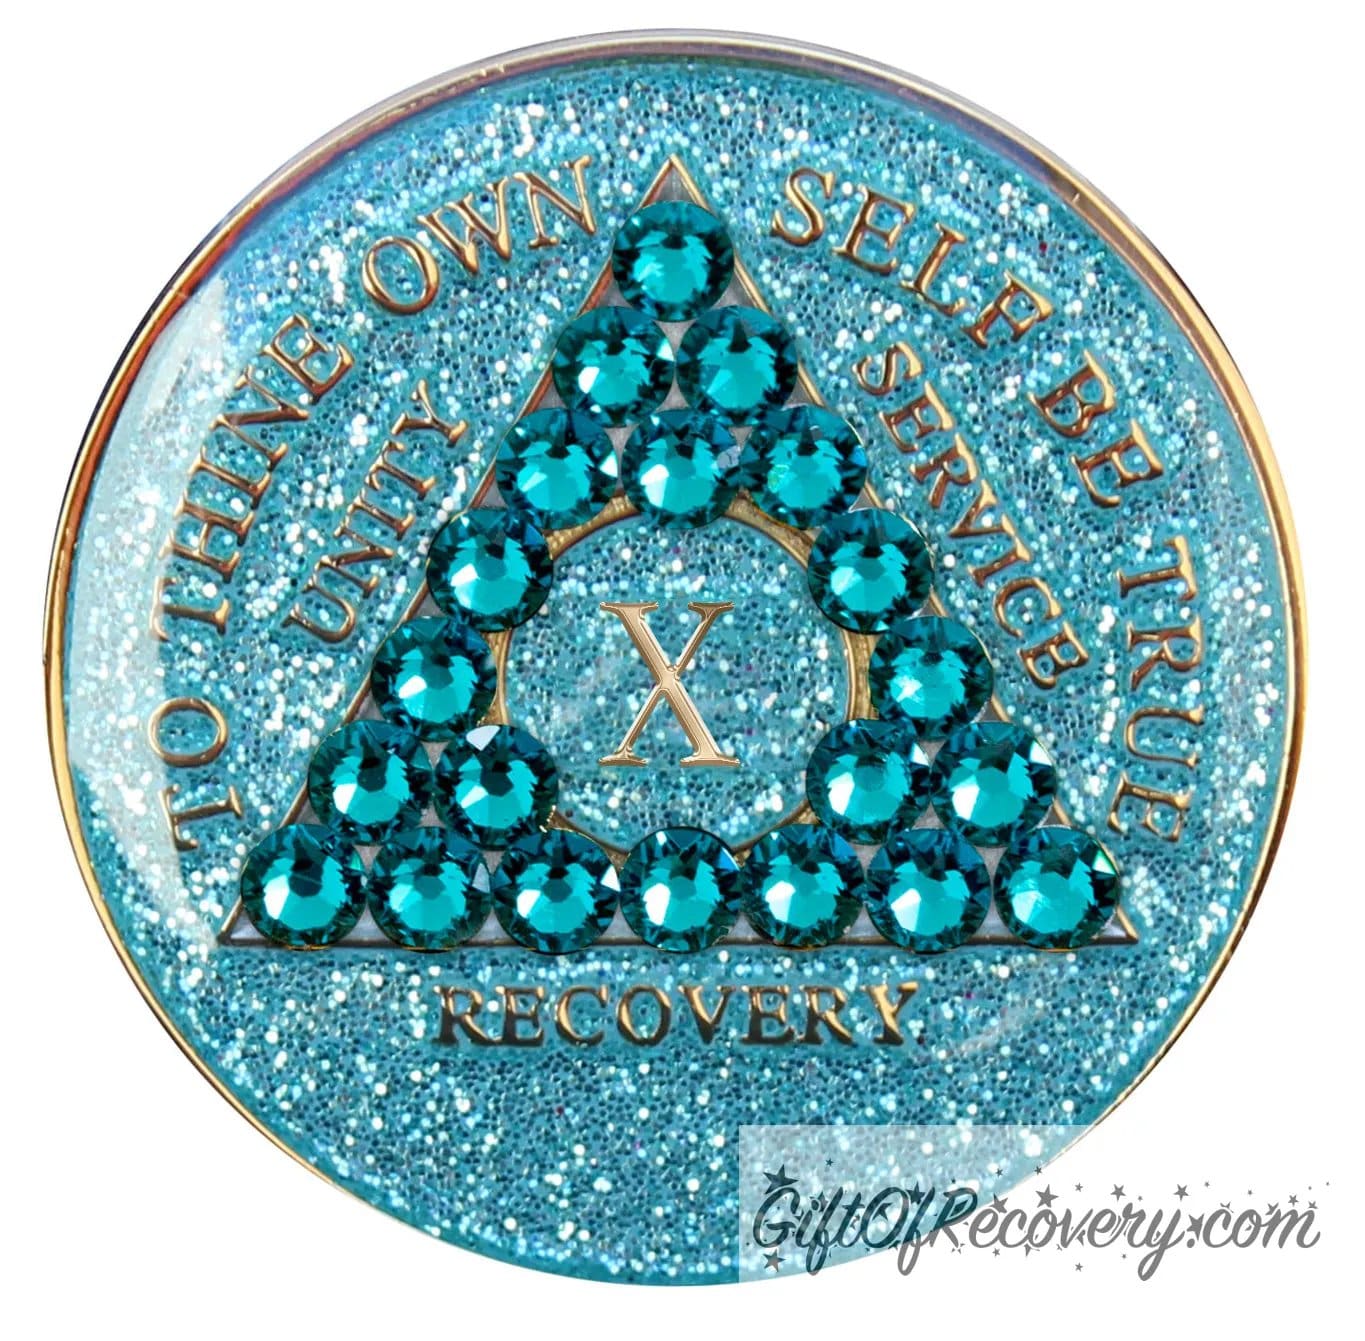 10 year AA medallion in aqua glitter with to thine own self be true, unity, service, recovery, the roman numeral in the center, and the outer rim of the medallion embossed in 14k gold plated brass, the center triangle has 21 genuine blue zircon crystal to give it a sparkle, it is sealed with resin for a shiny finish.